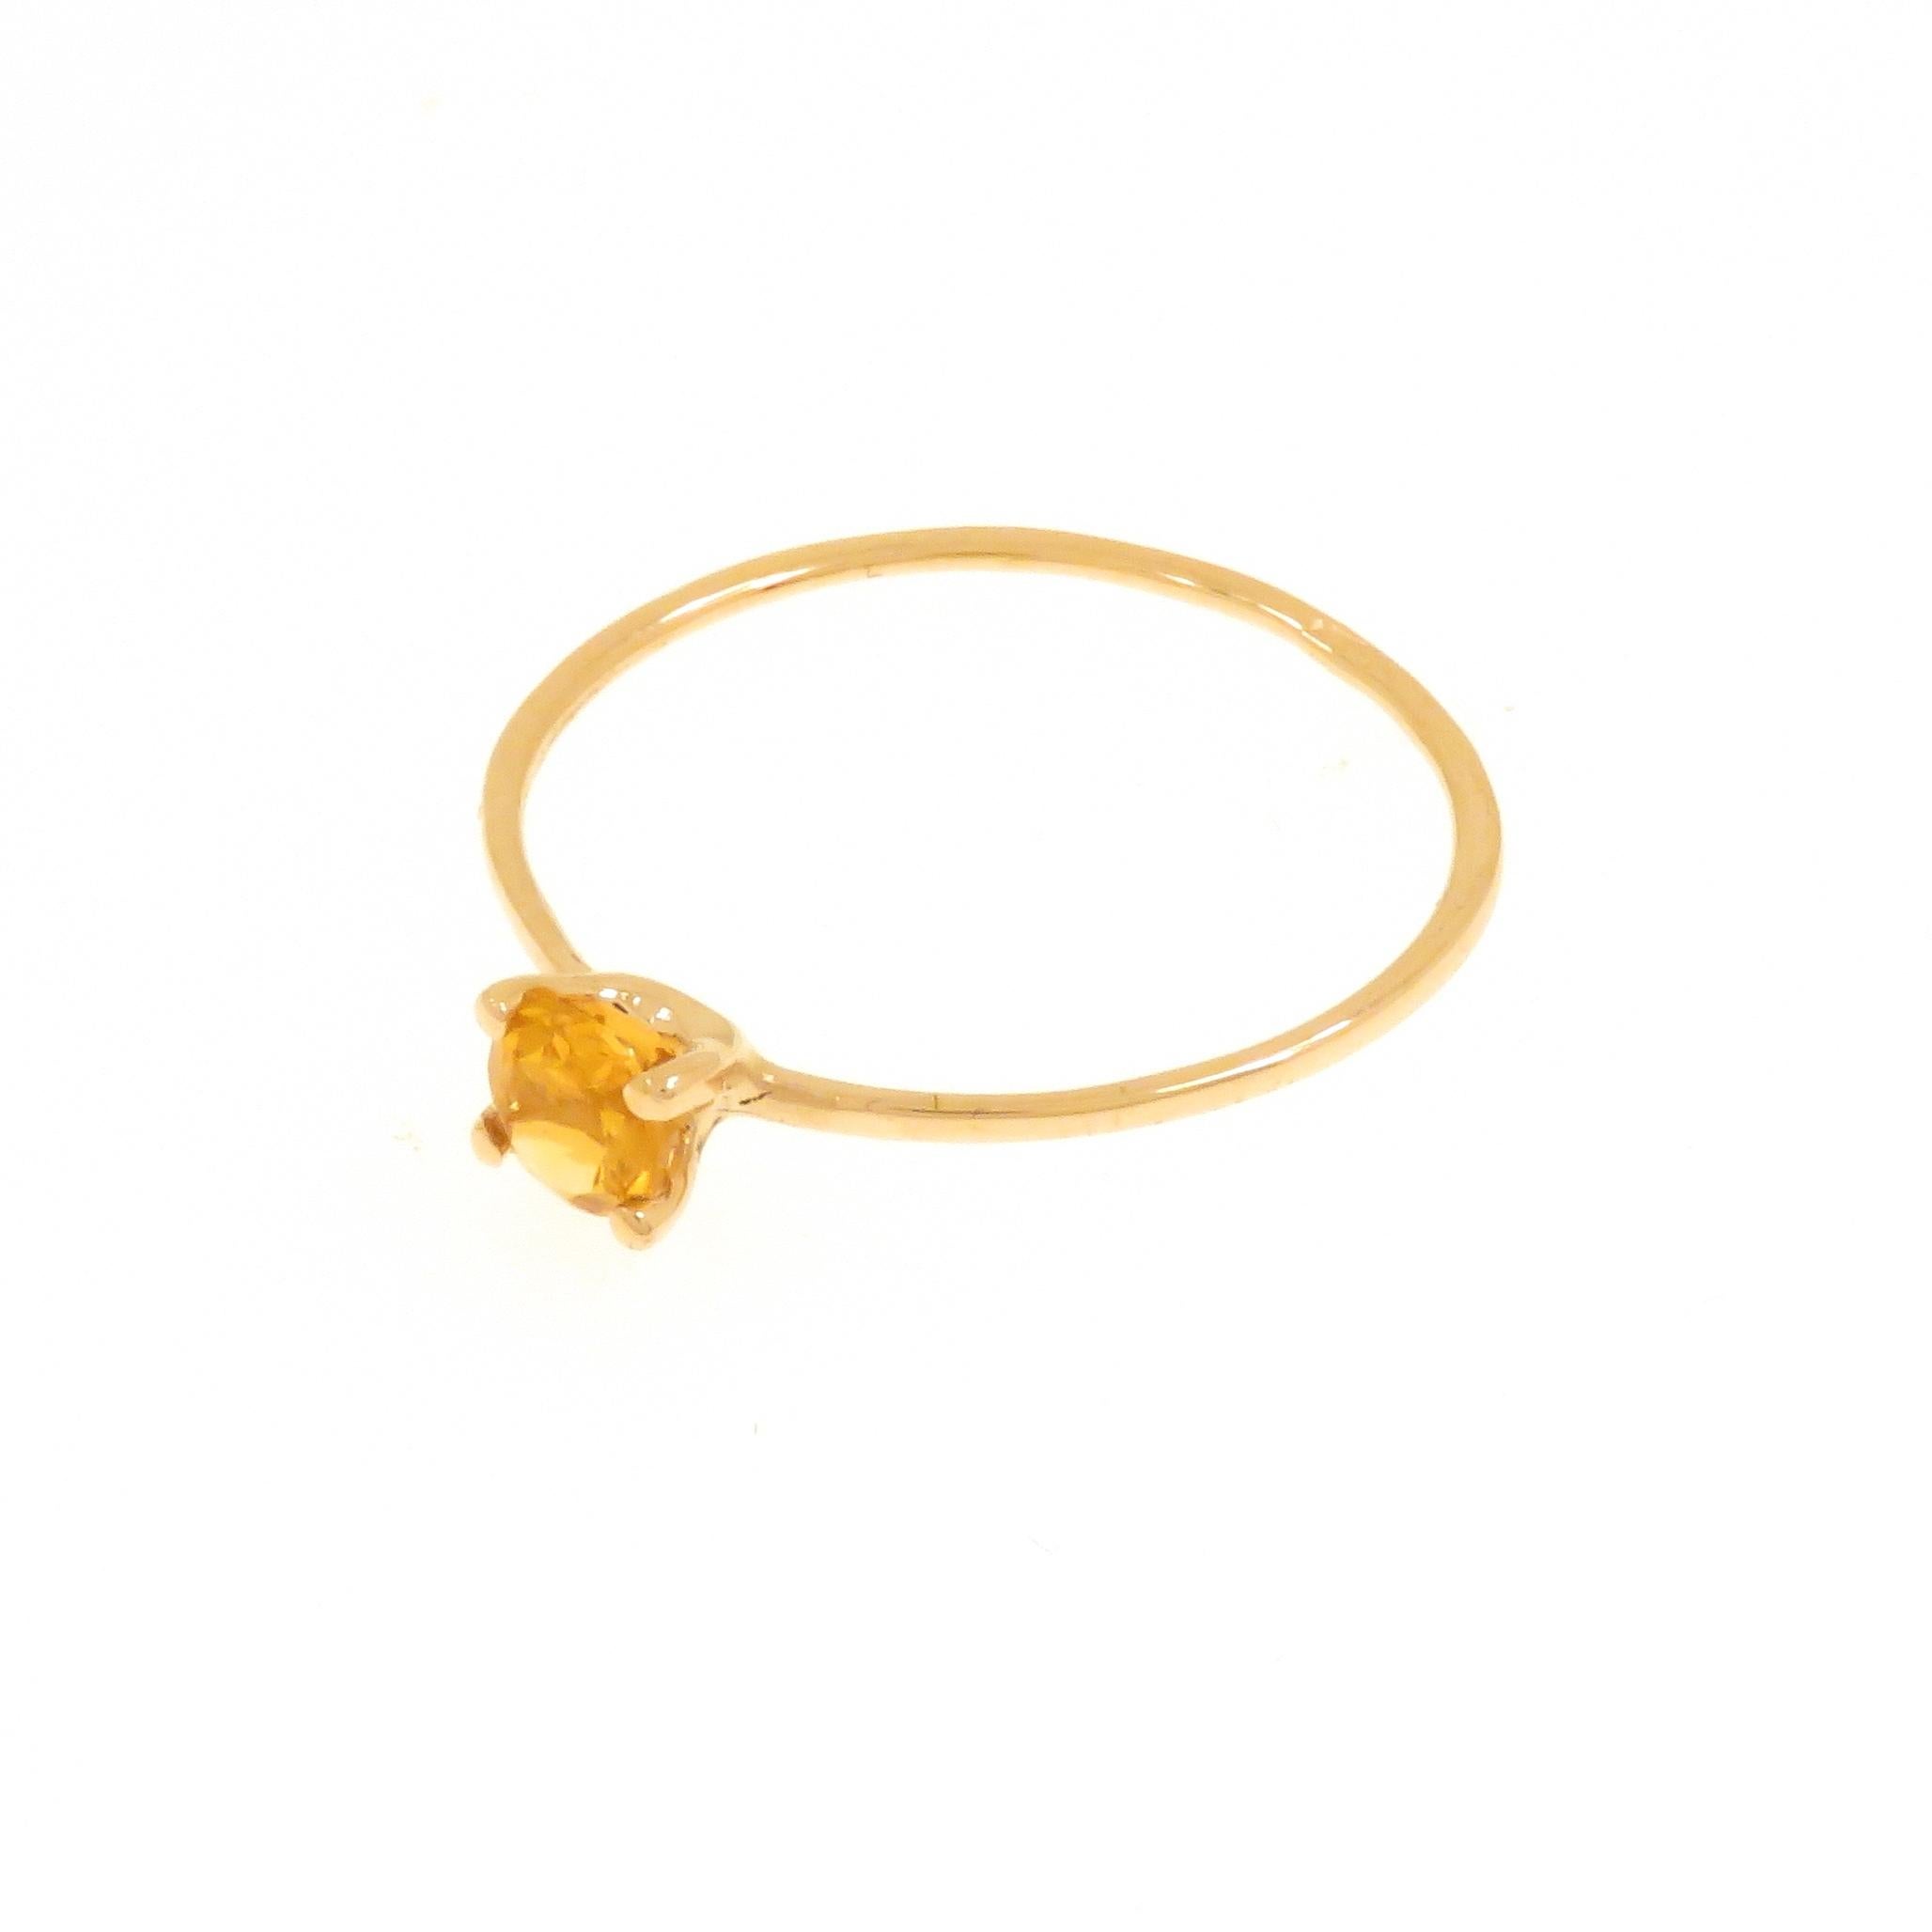 Brilliant Cut Citrine 9 Karat Rose Gold Ring Handcrafted in Italy For Sale 2